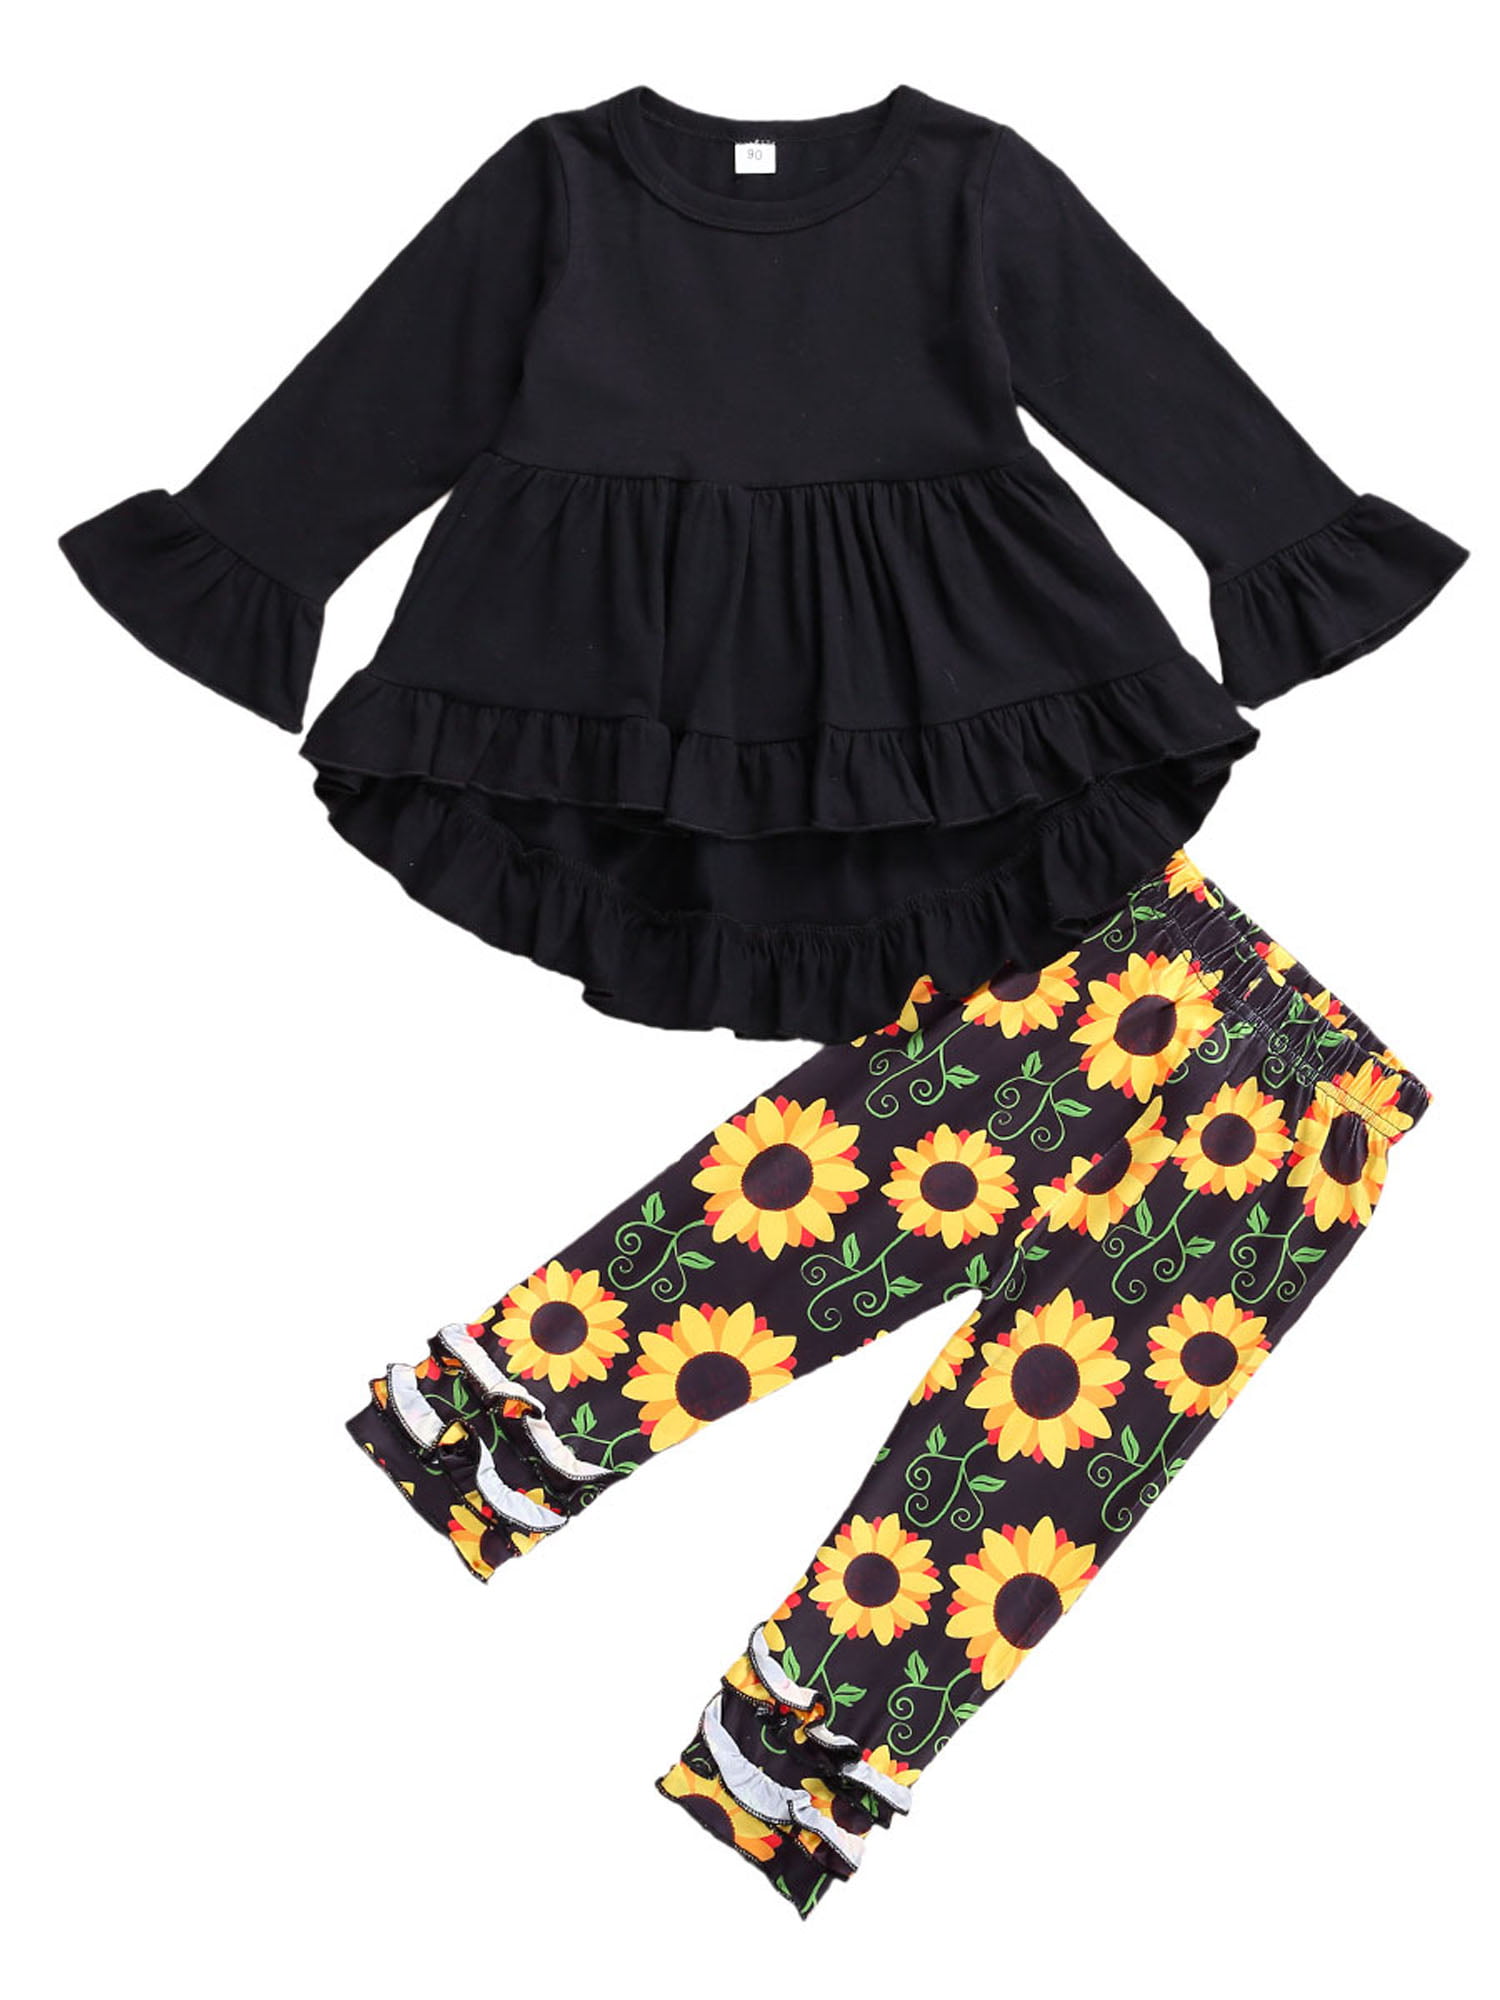 Toddler Little Girls Ruffle Fall Dresses+Floral Leggings Pants Outfit